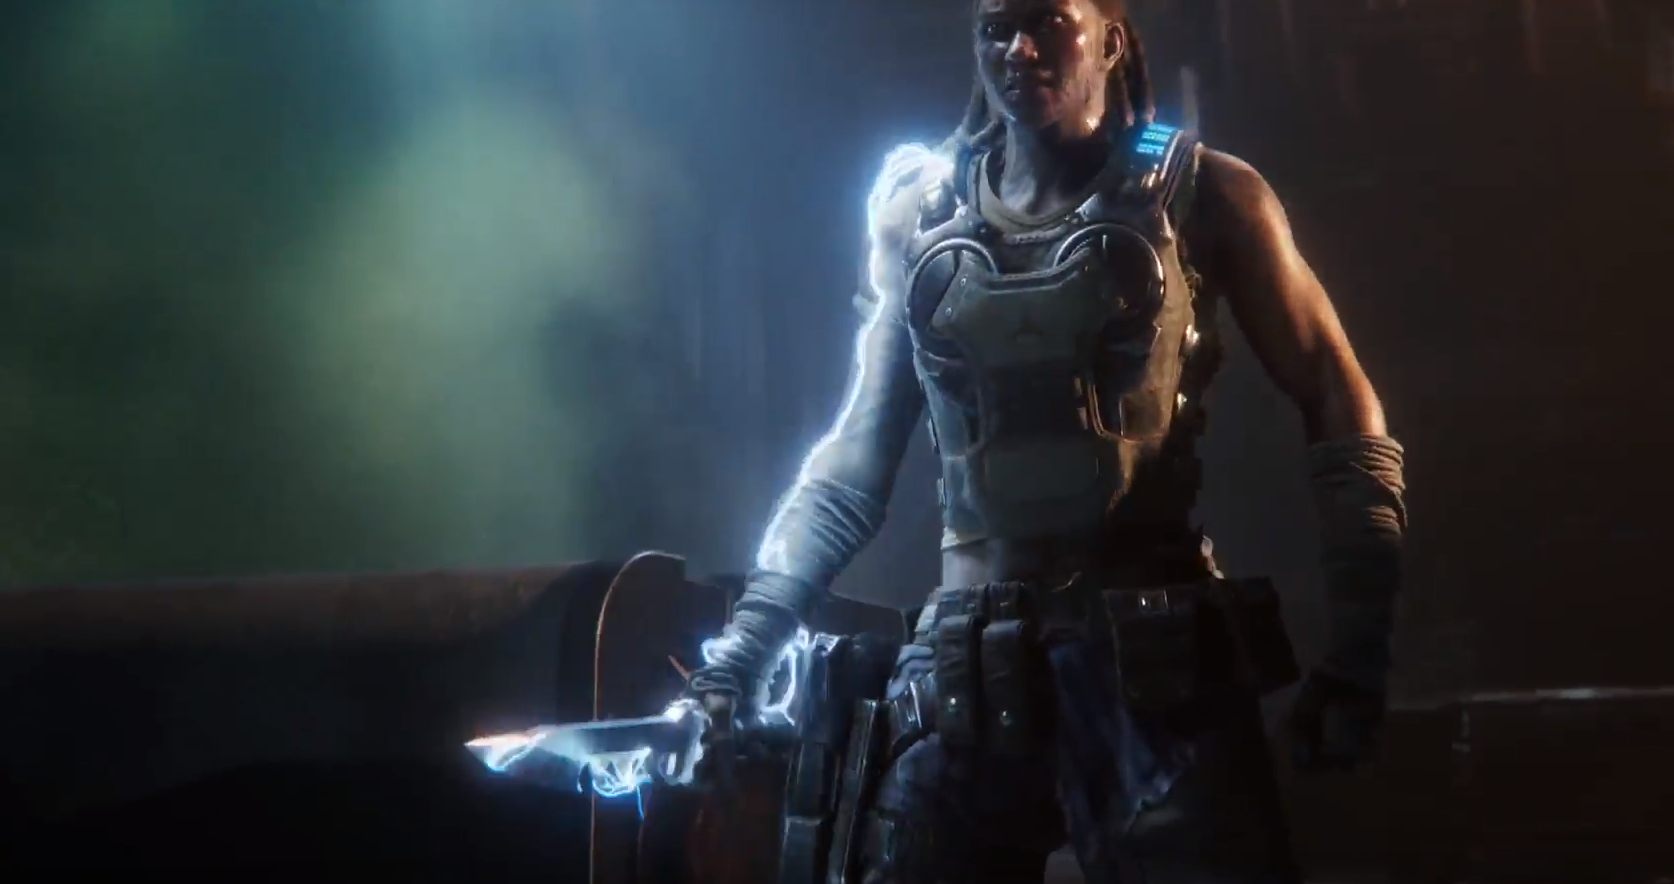 Gears 5 has a new multiplayer mode, Escape